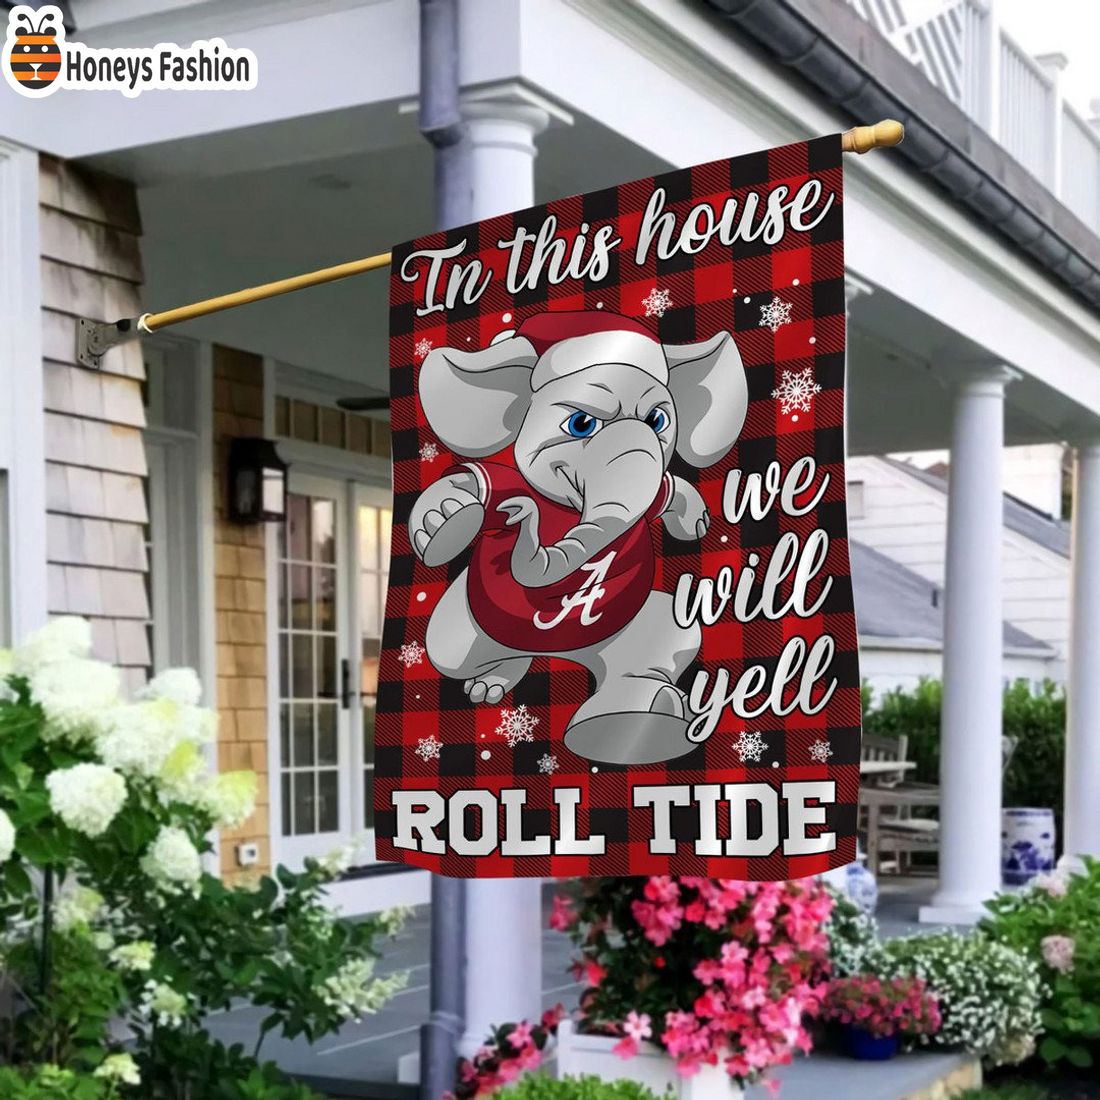 Alabama crimson tide in this house we will yell Roll Tide flag